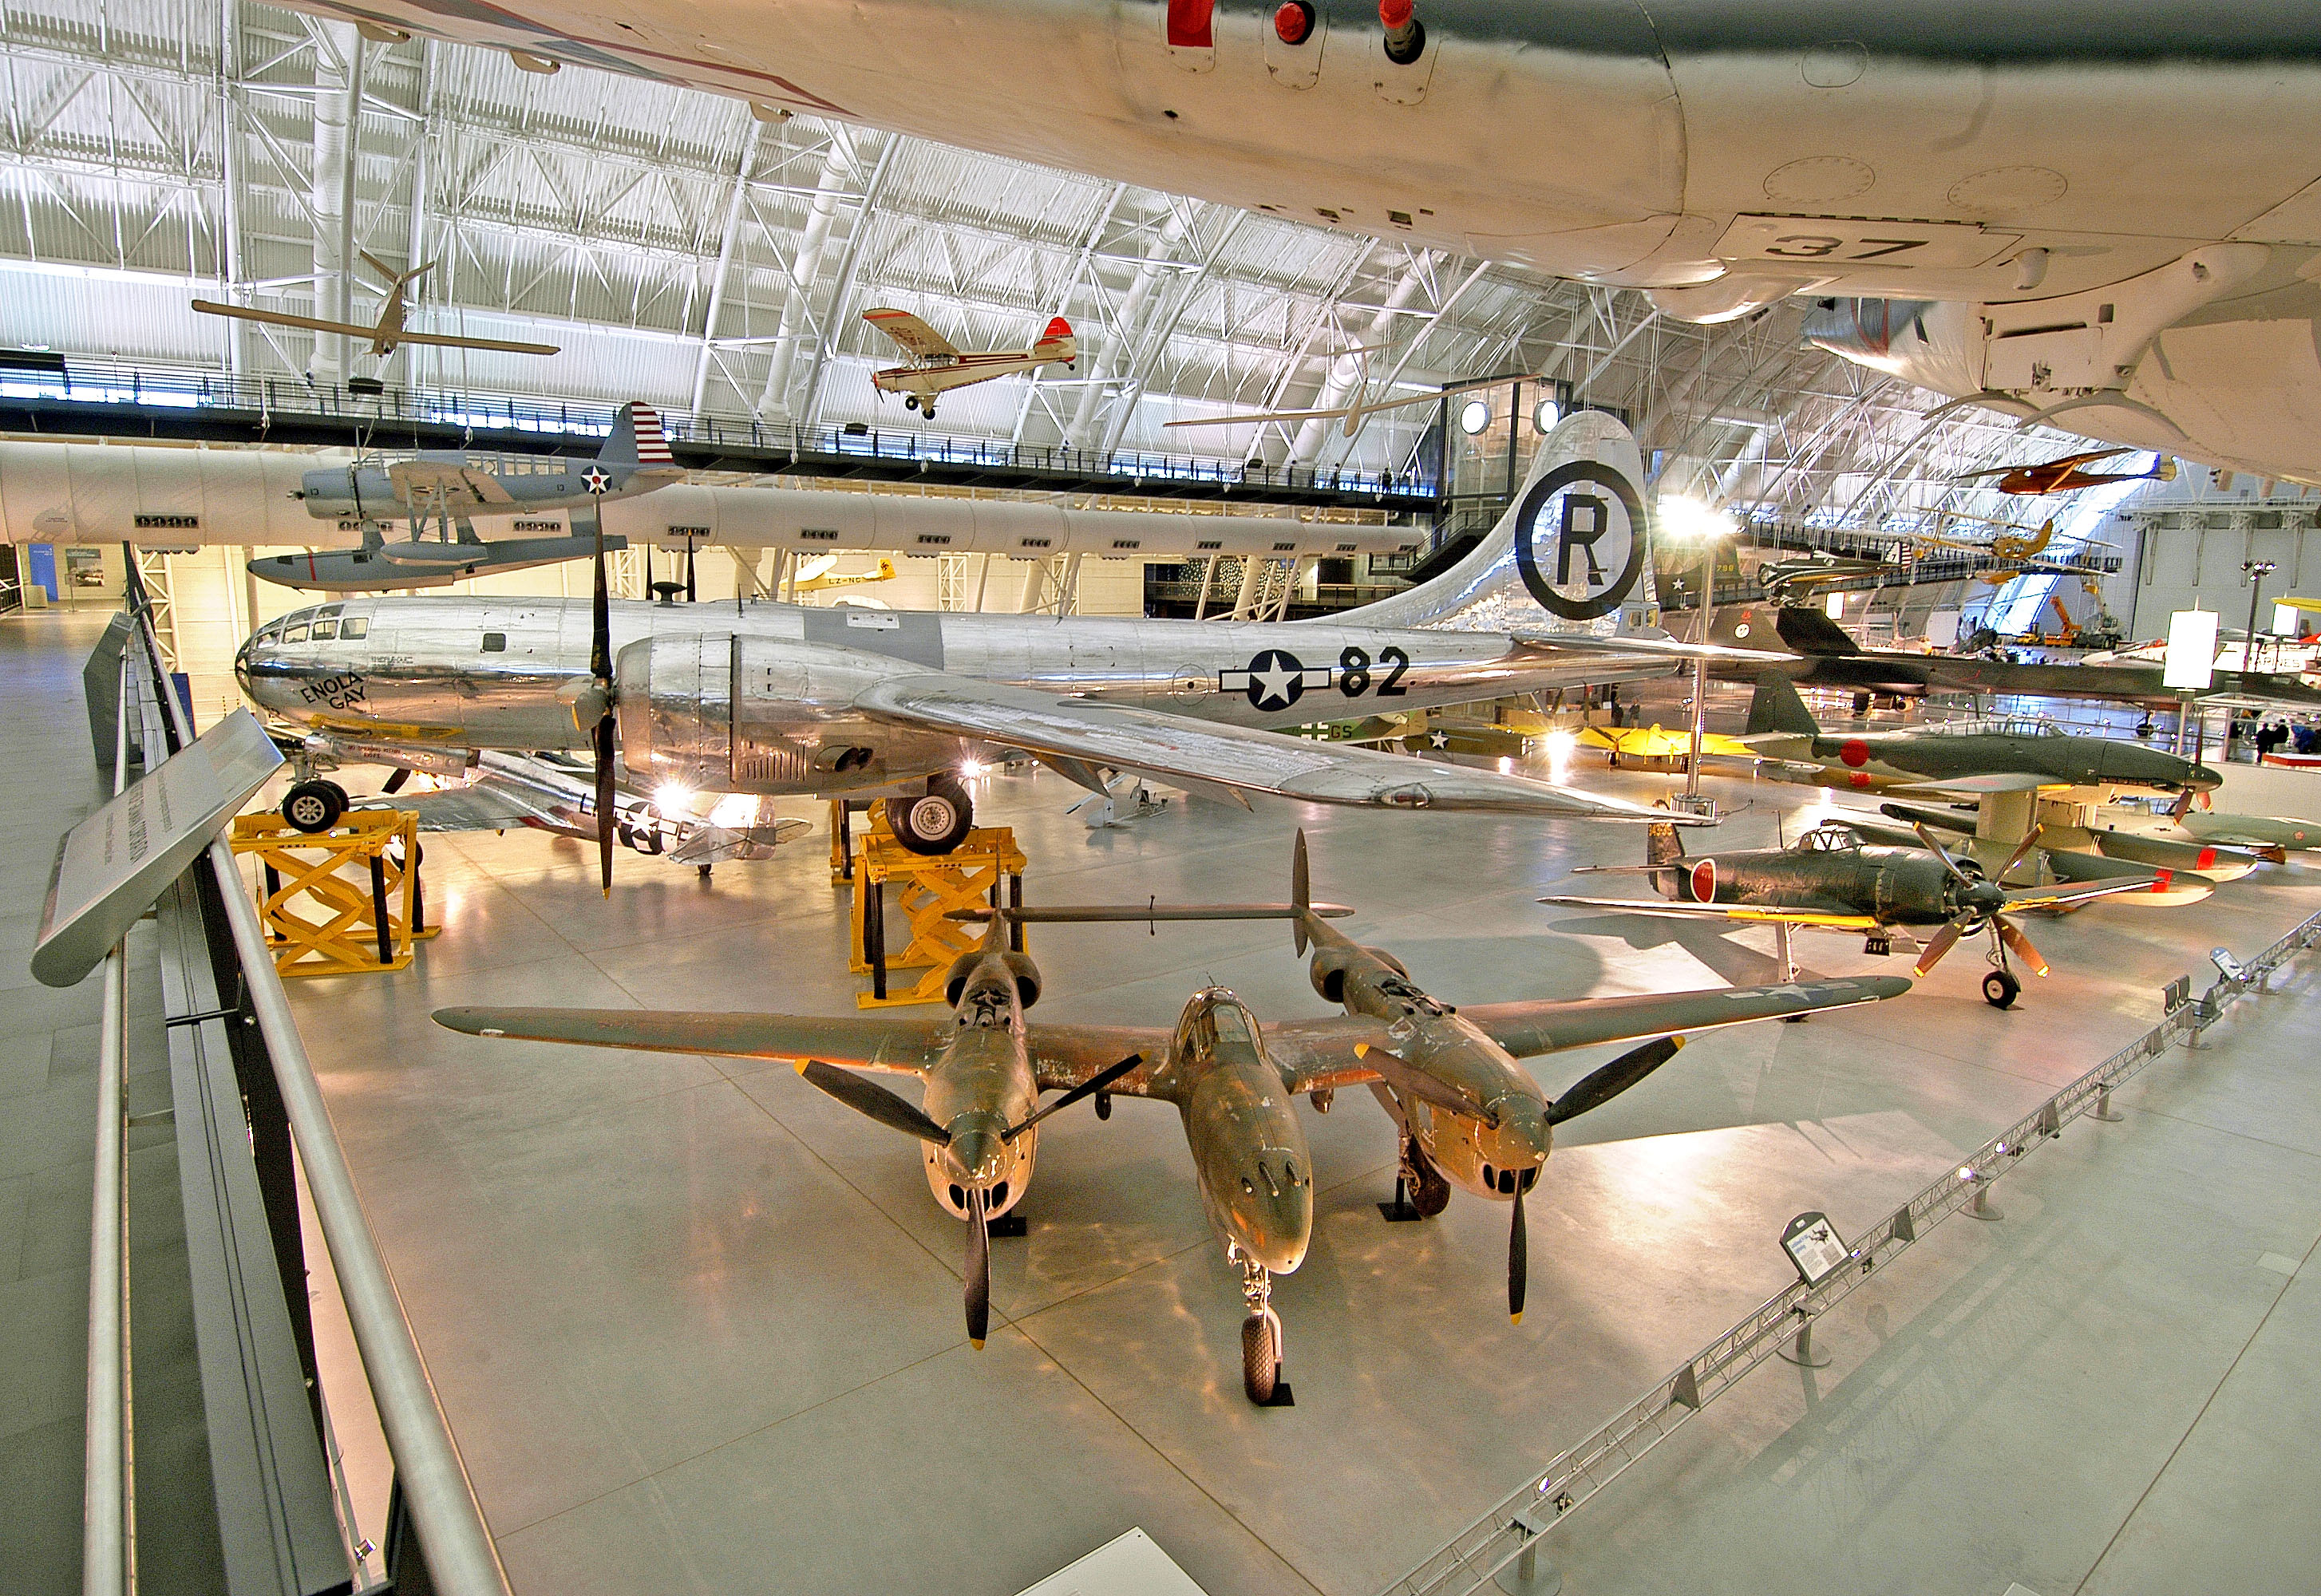 propose your vision for the enola gay exhibit